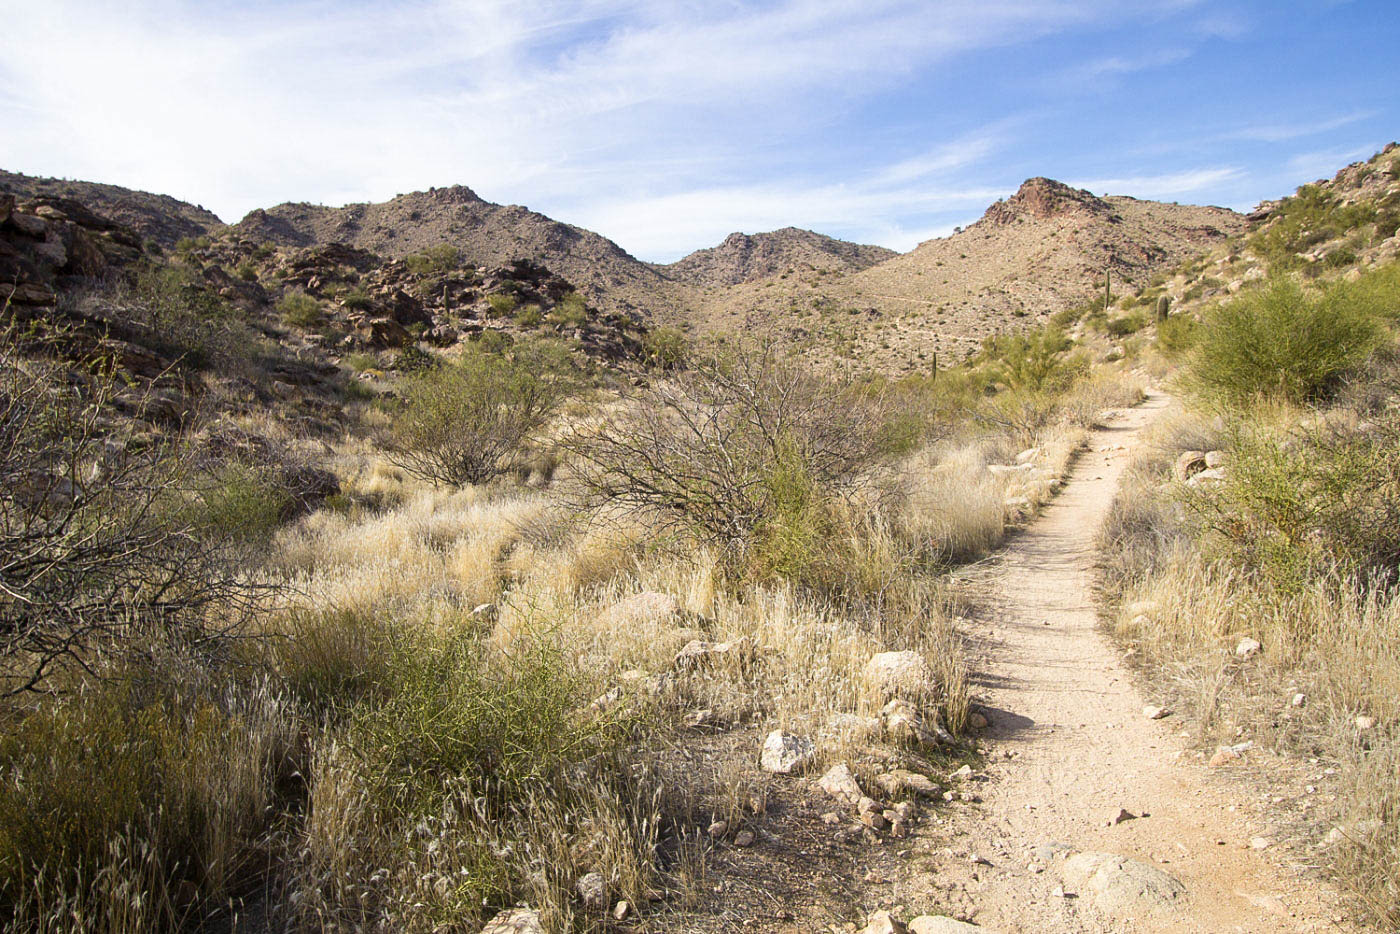 Hike Barry Goldwater Peak via Goat Camp and Mesquite Canyon Loop in White Tank Mountain Regional Park, Arizona - Stav is Lost